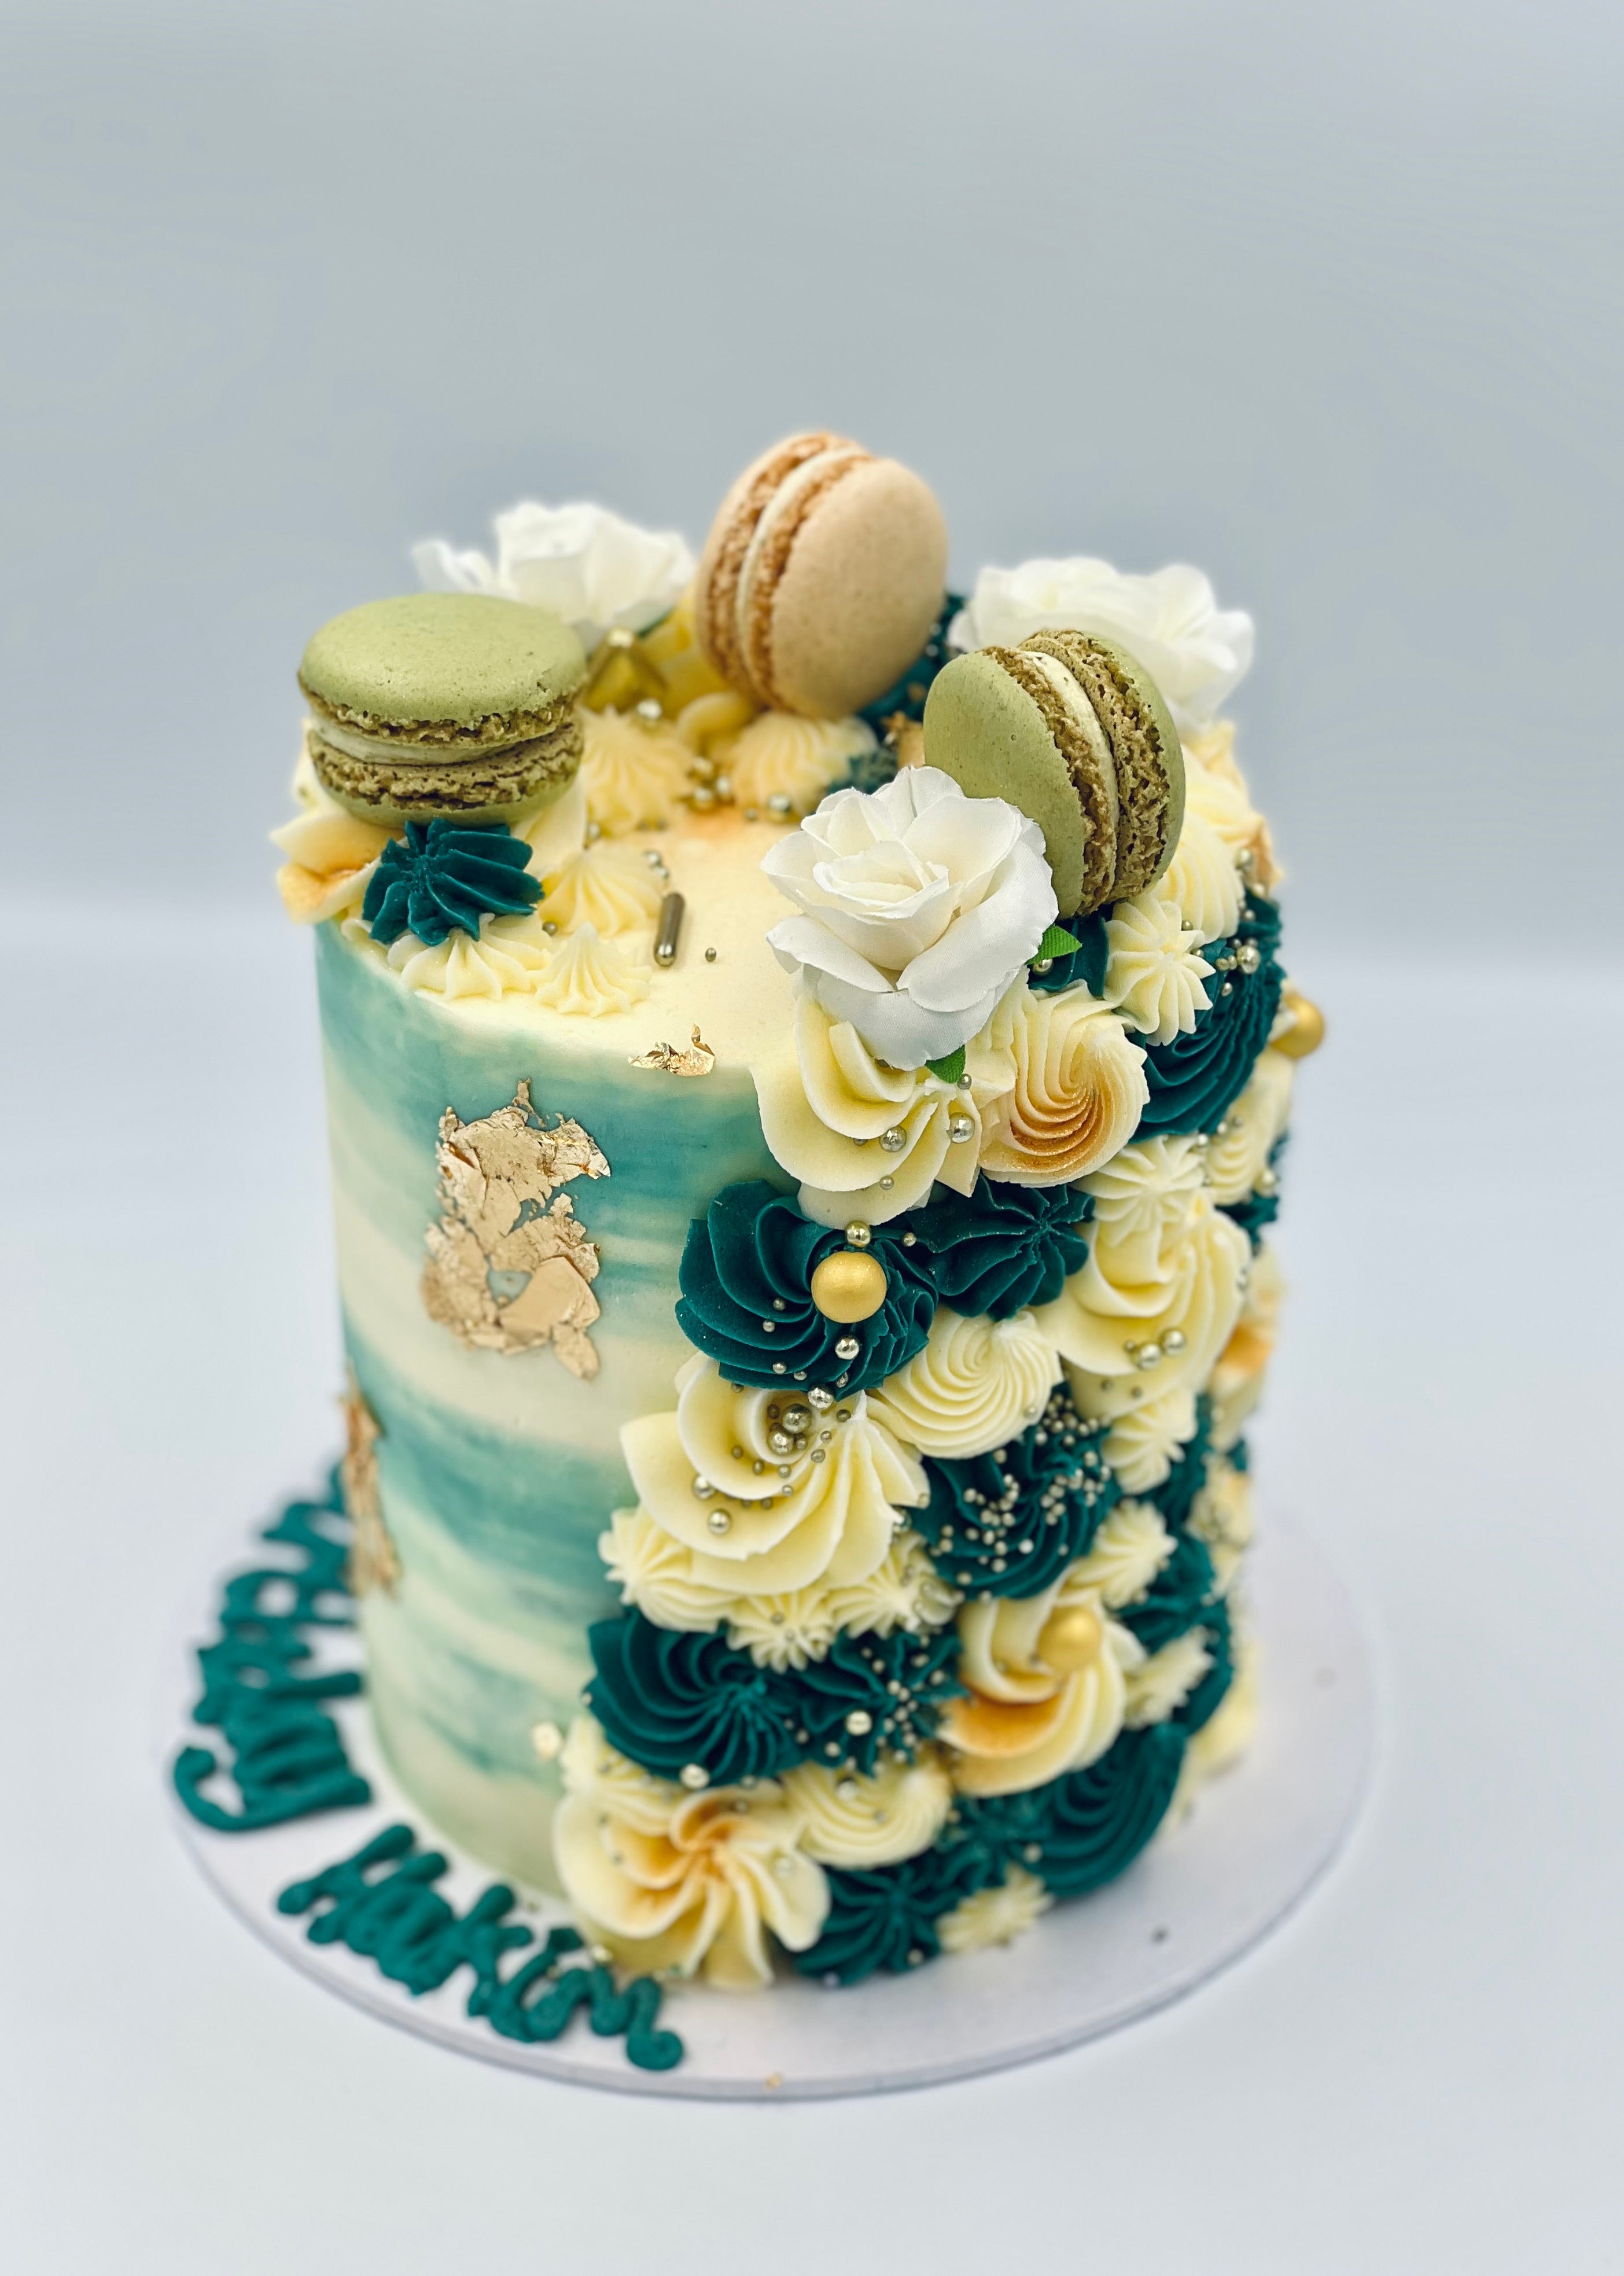 Macaron Number Cake - One or Two Digits for Anniversary or Birthday